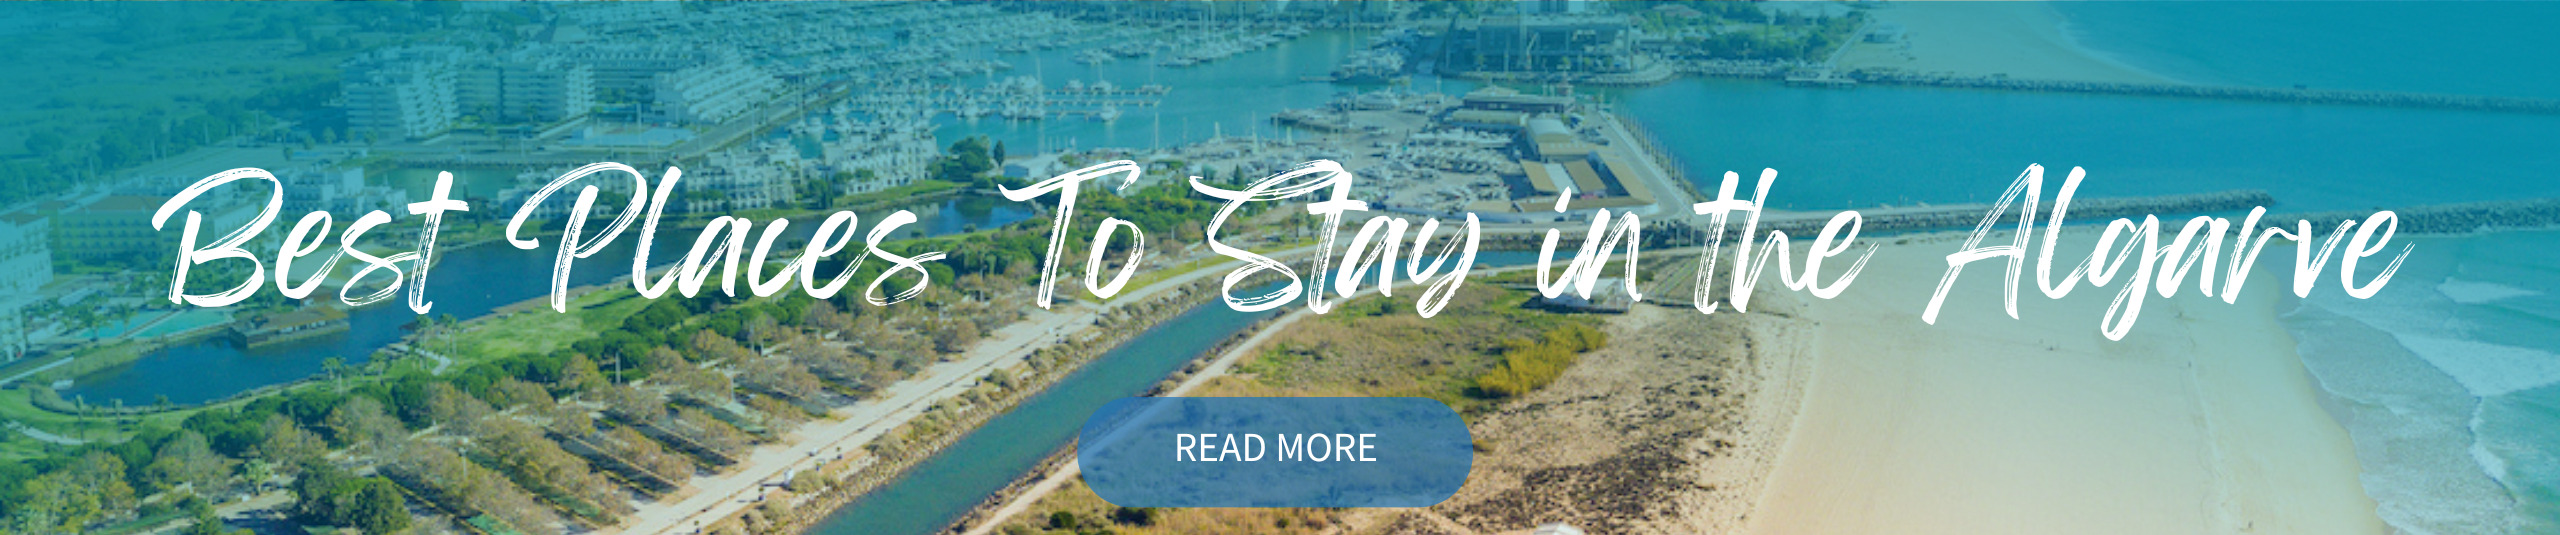 Best Places to stay in the Algarve CTA web banner